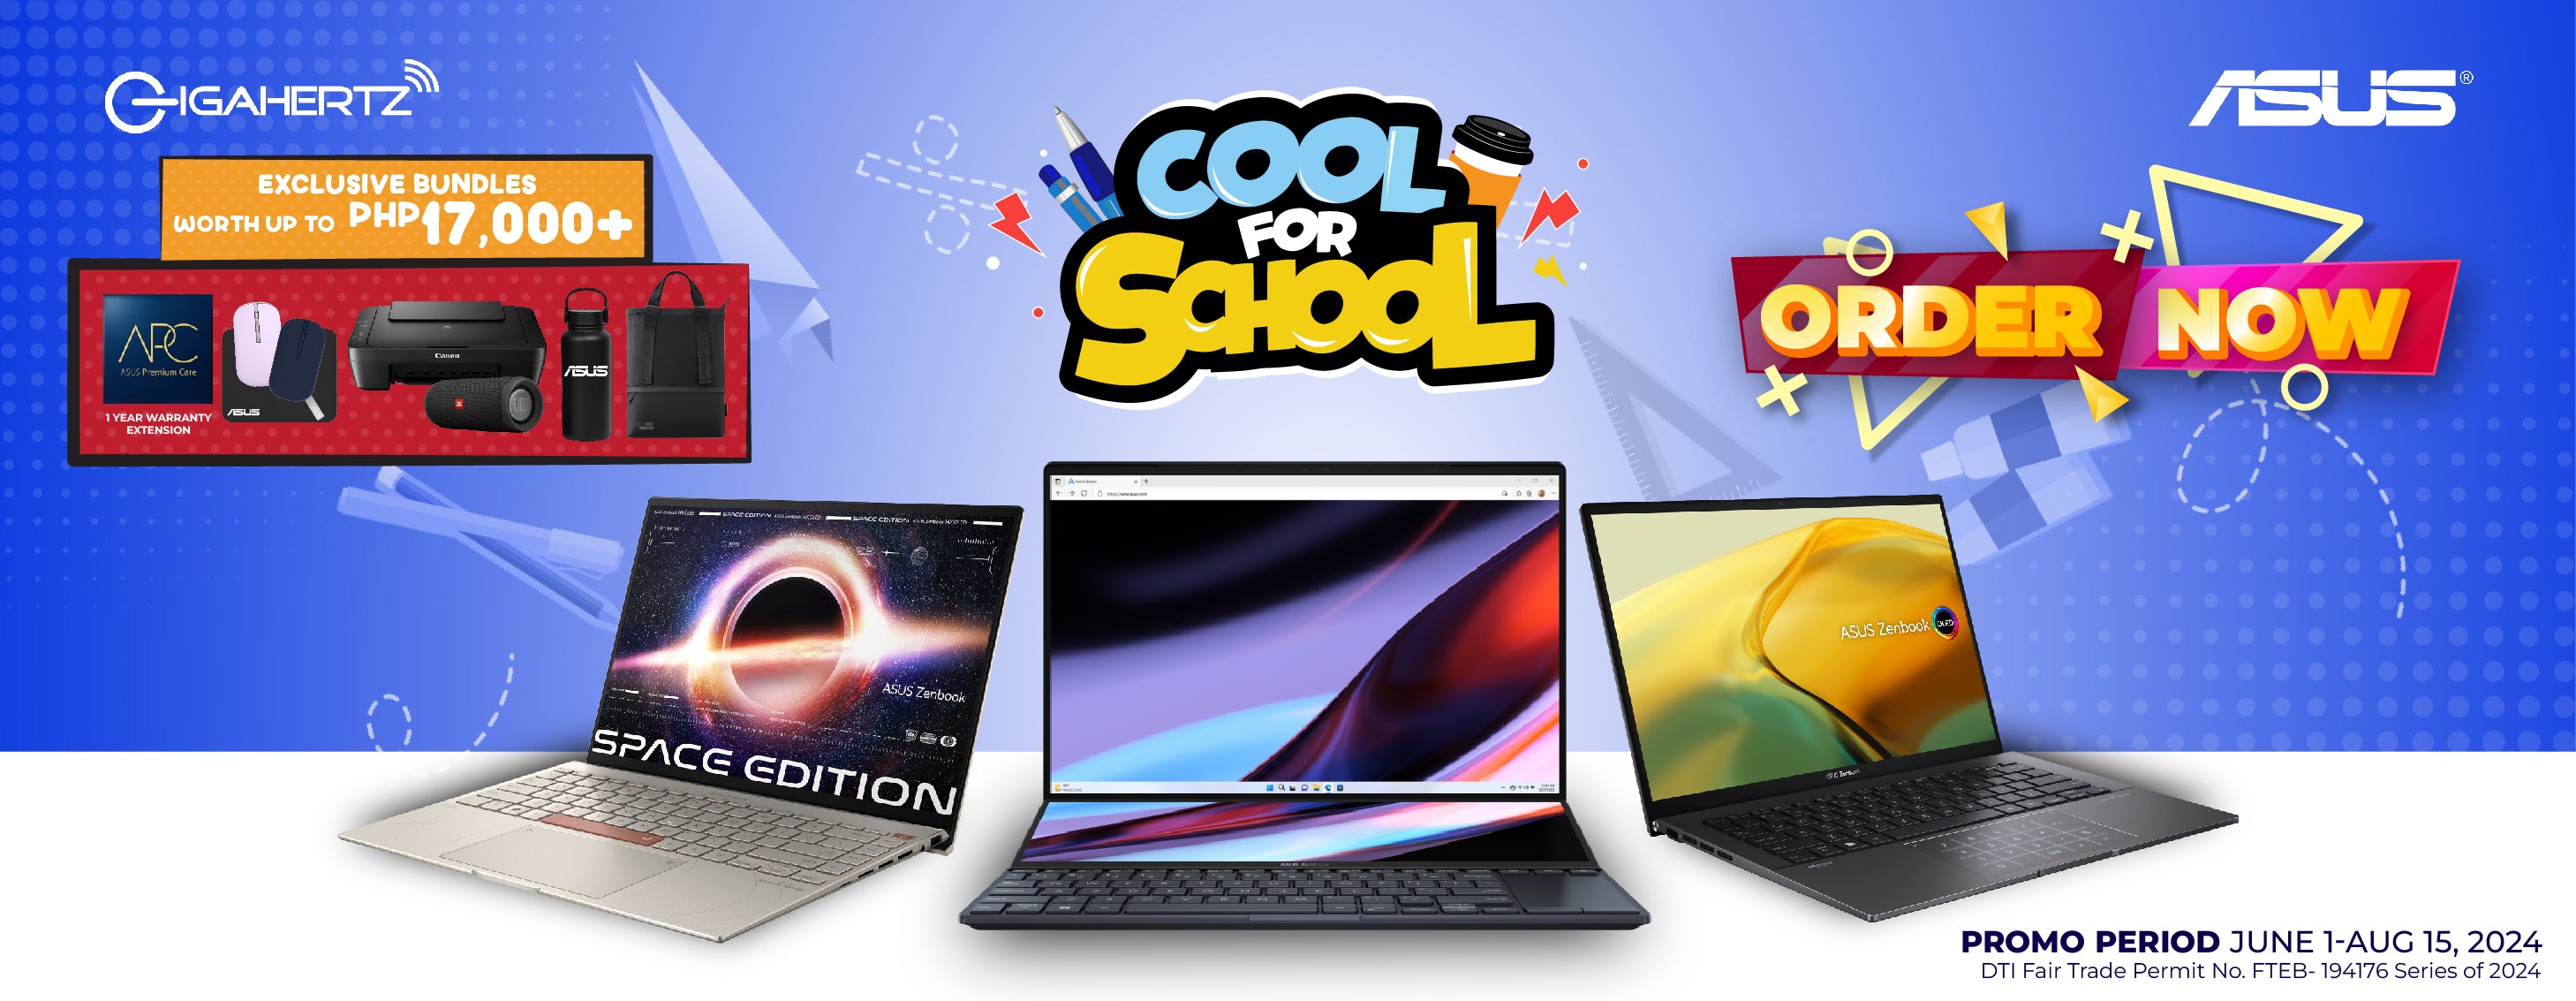 Laptop sale Philippines | Affordable laptops for school | Tech gadgets for students | Back to school | Gigahertz